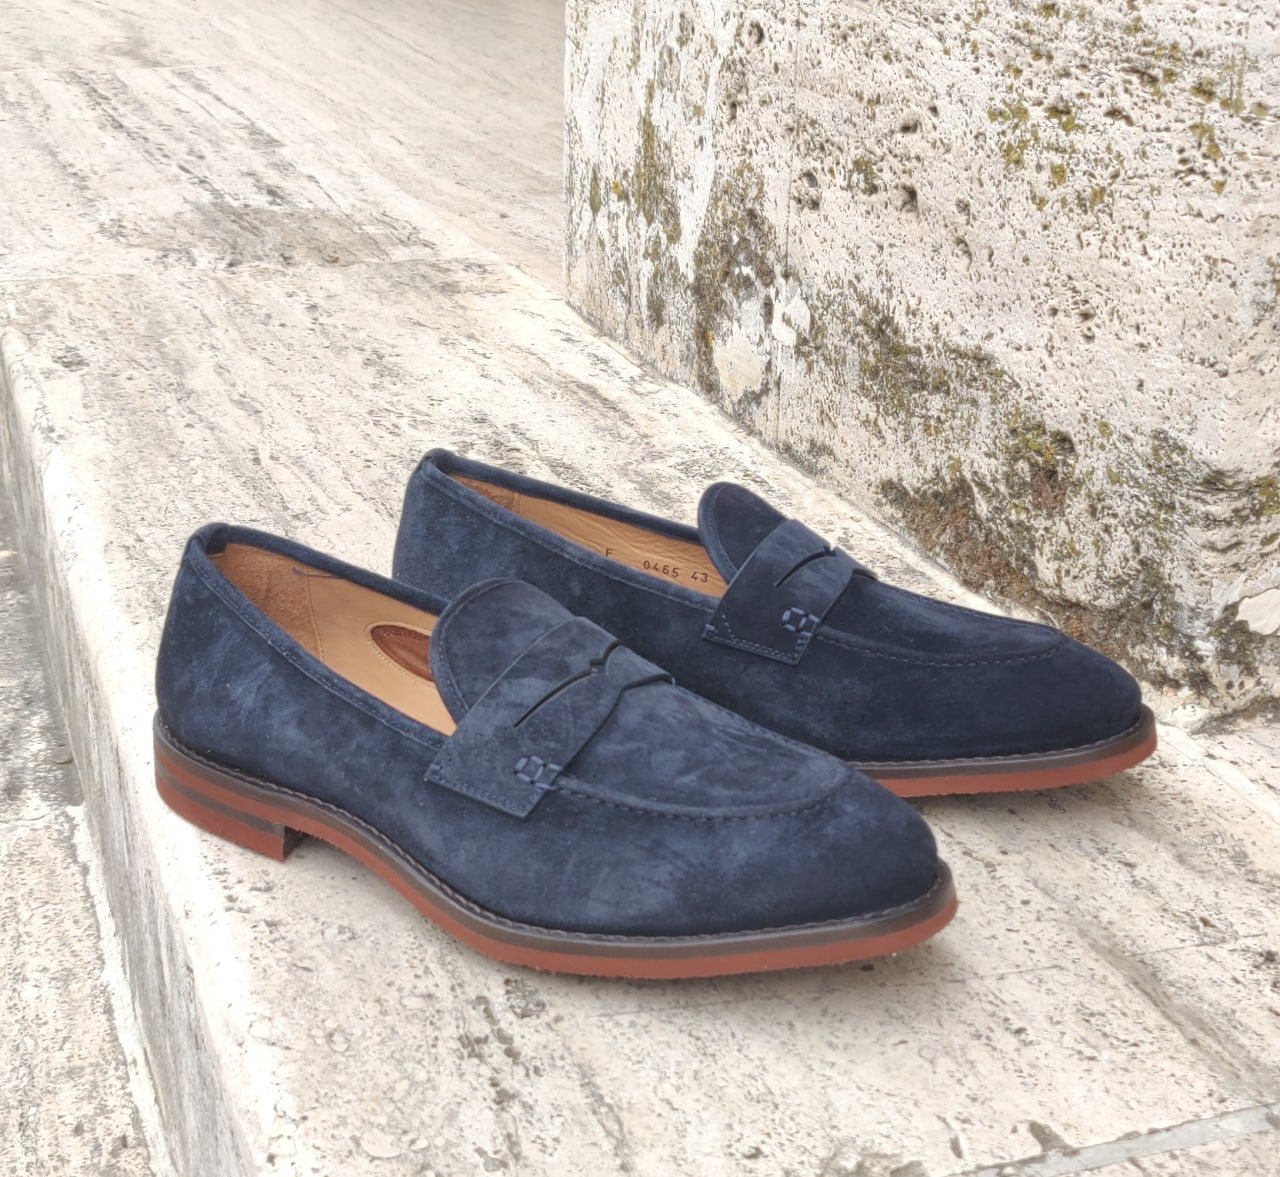 Fabi suede blue loafer FU0465 small size